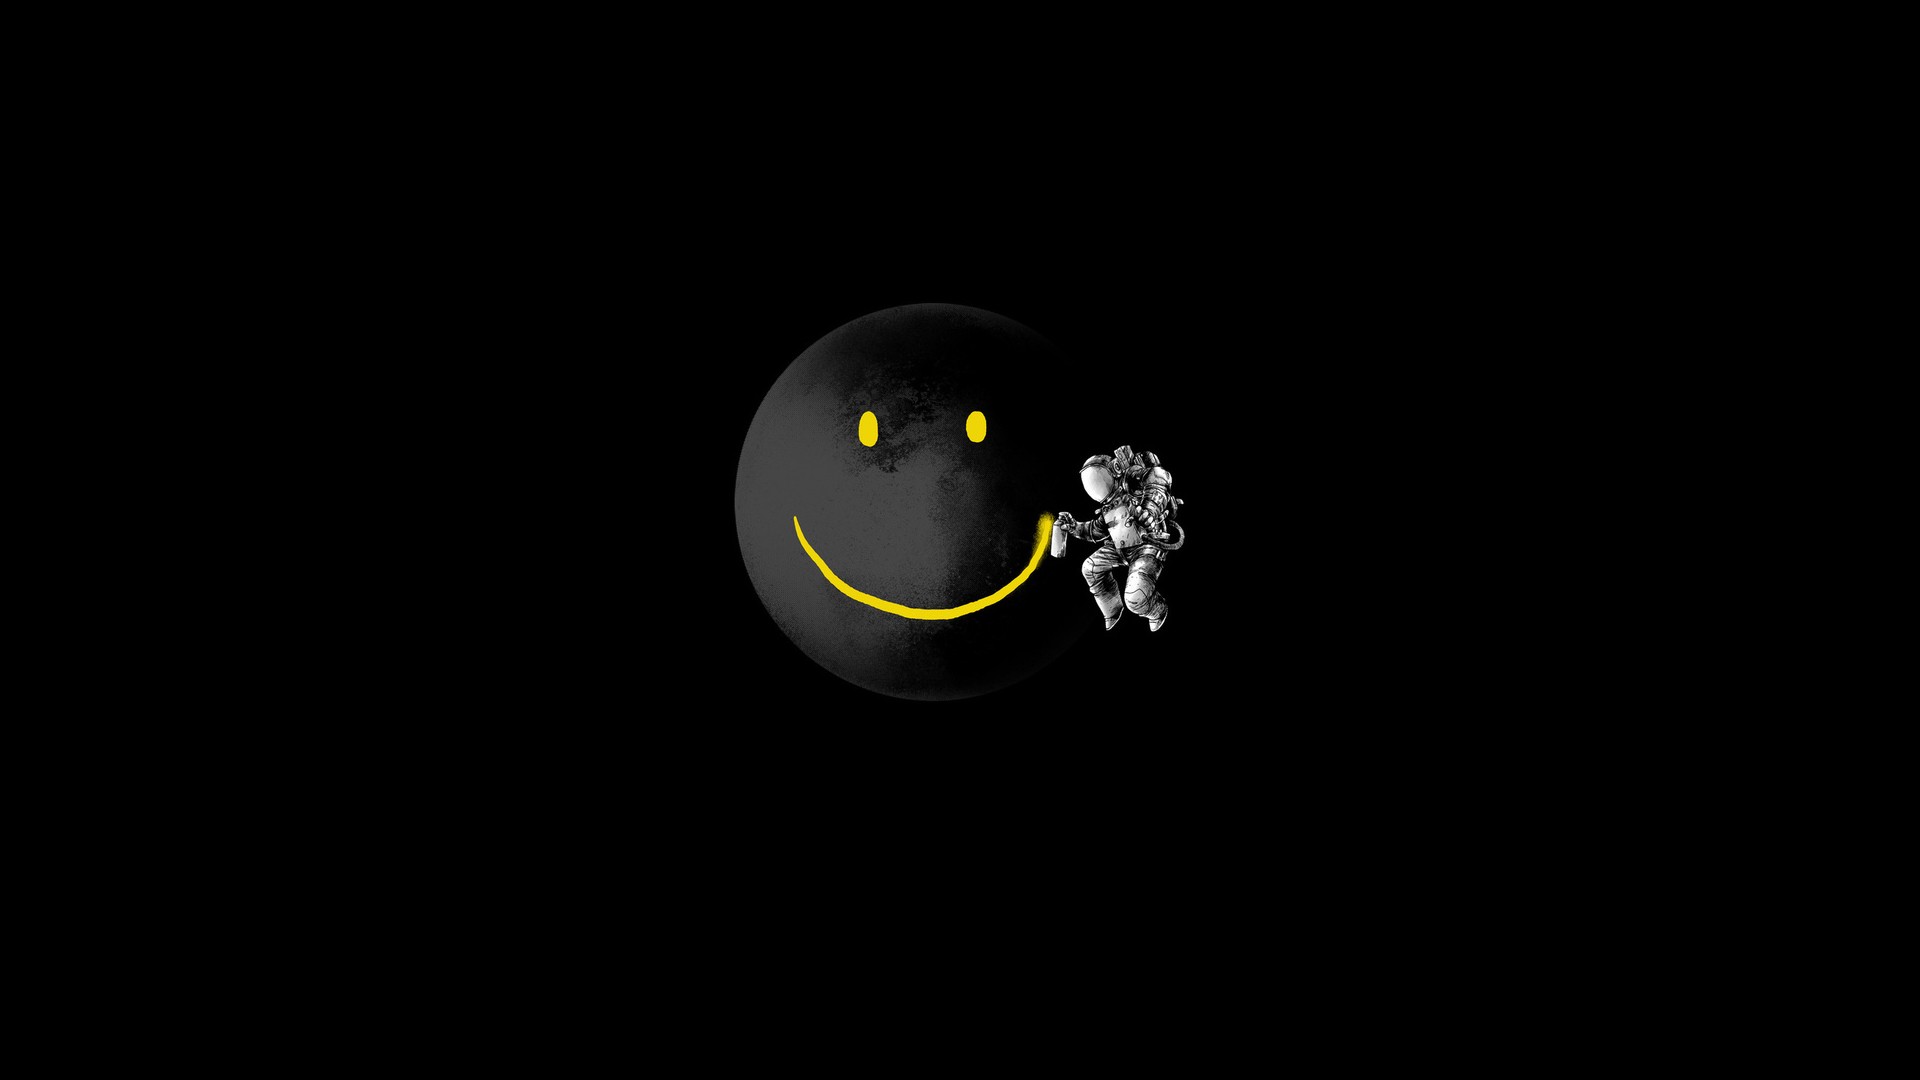 Smiley Face Spaceman Black Background 1920A wallpaper background 1920x1080